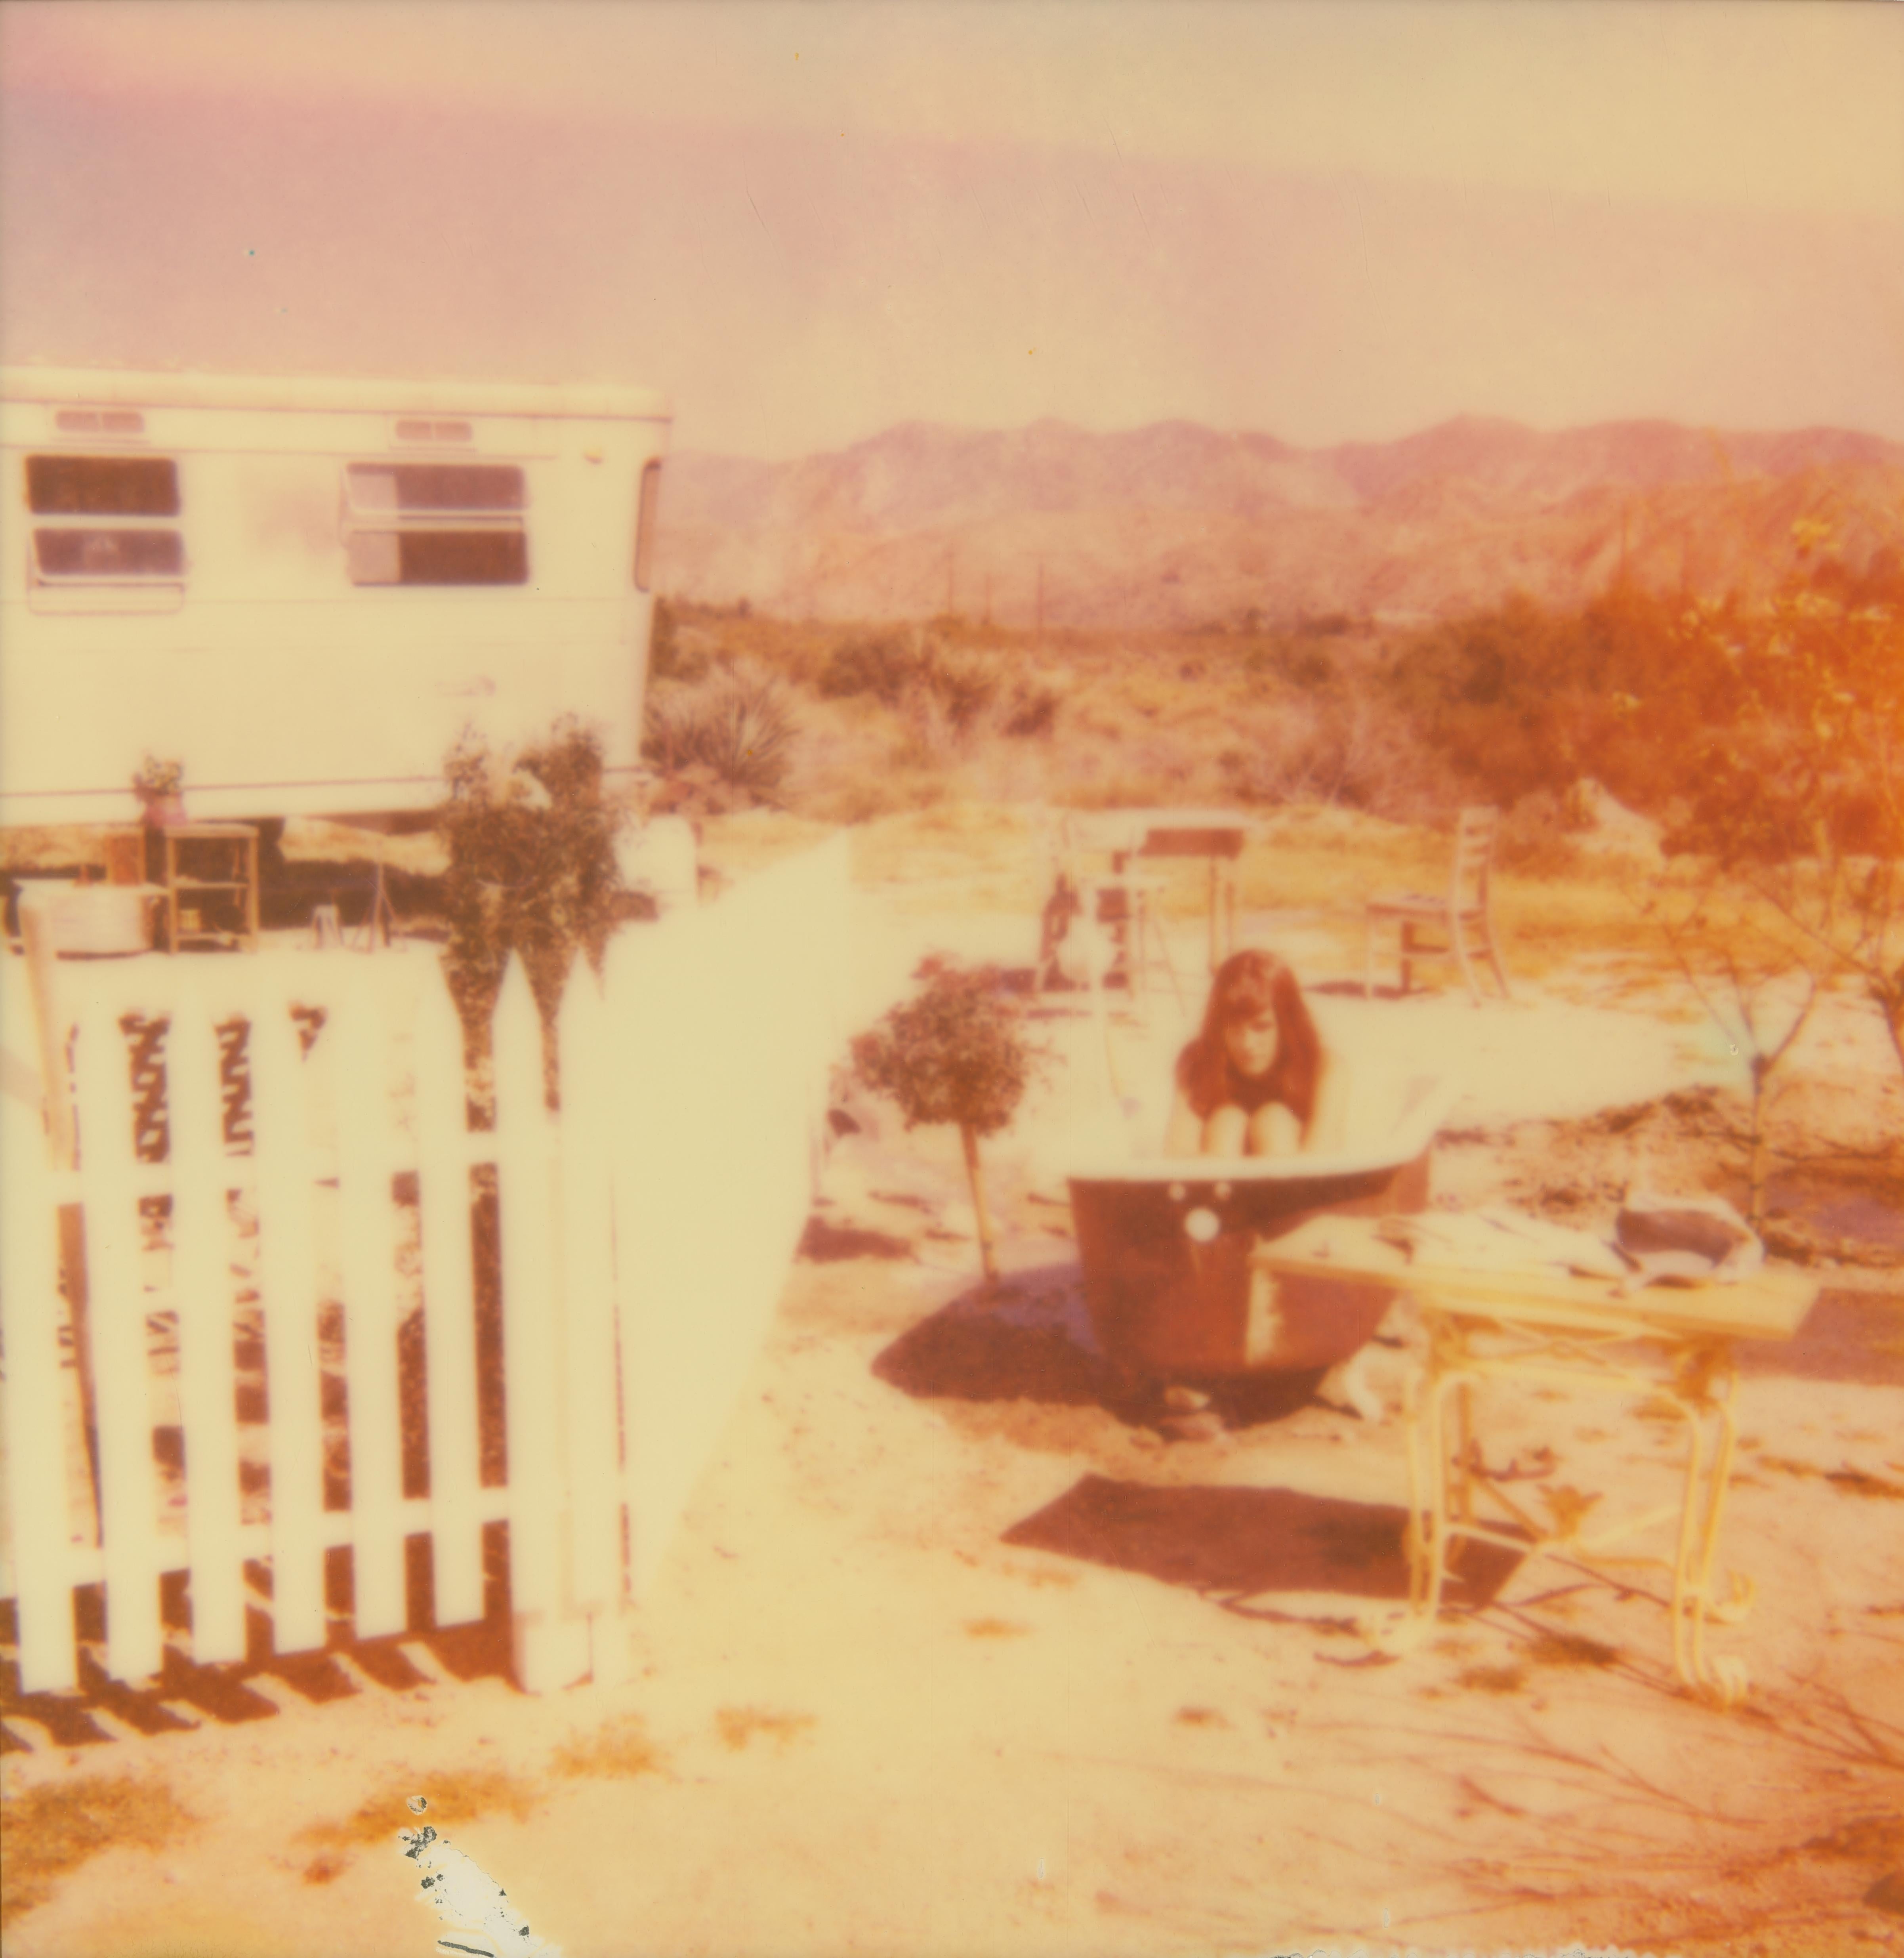 Stefanie Schneider Nude Photograph - The Girl I (The Girl behind the White Picket Fence) - Contemporary, Polaroid